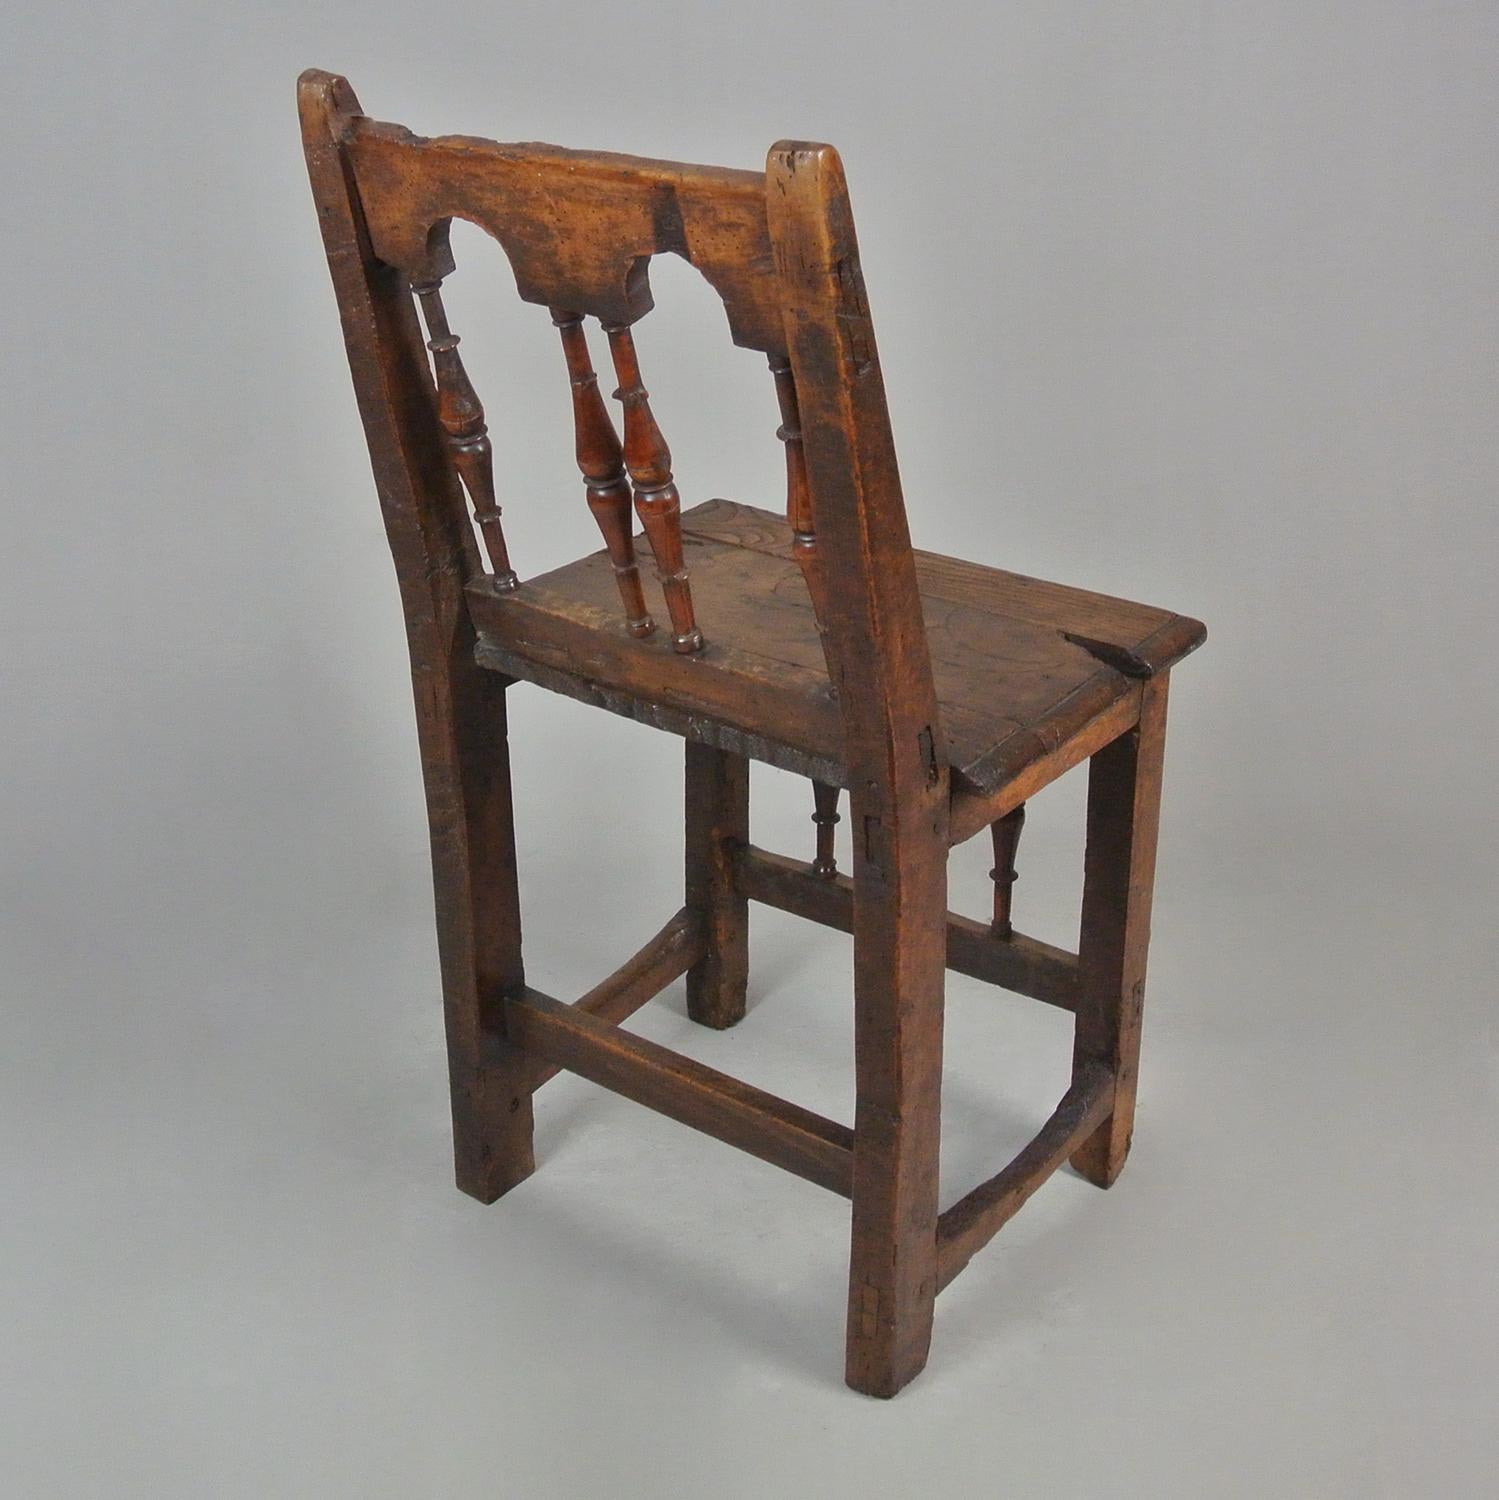 Rare and Beautiful Walnut and Yew Spindle 'Back Stool' Chair c. 1600 For Sale 3